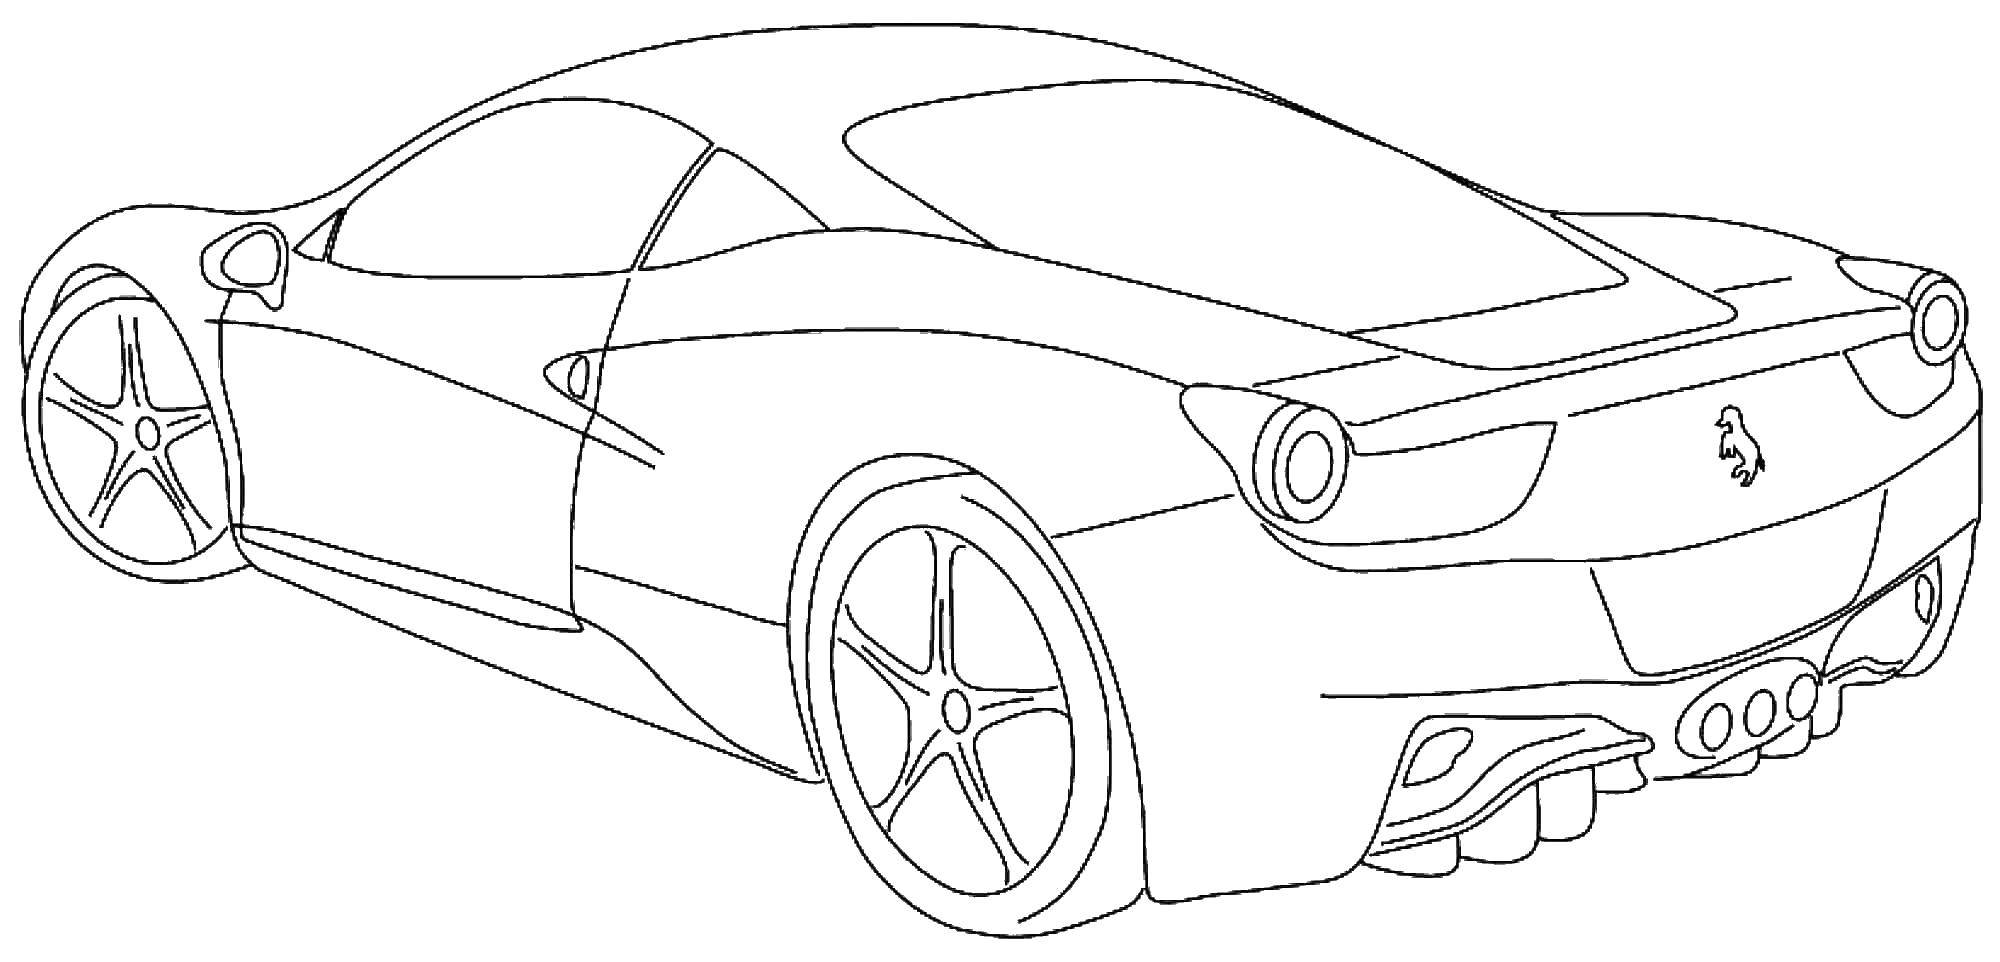 Coloring Sports car. Category machine . Tags:  machinery, transportation.